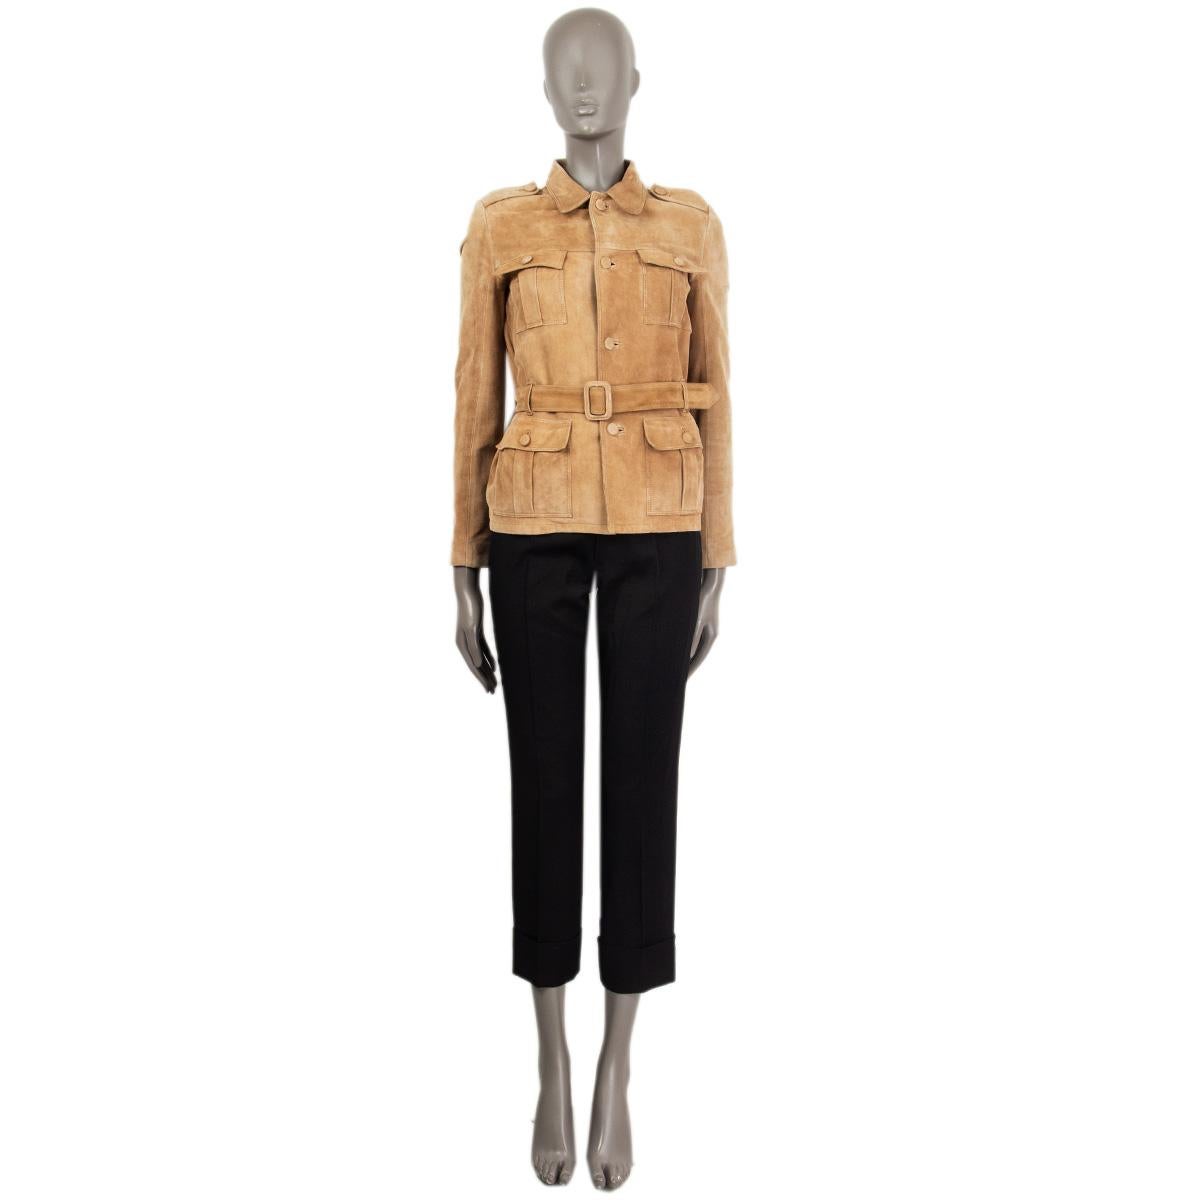 100% authentic Saint Laurent belted Saharienne safari jacket in beige smooth suede goatskin (100%) and lined in black silk (100%). Opens with 4 buttons and has 4 flap-pockets and epaulettes on the shoulder. Has been worn with some soft natural